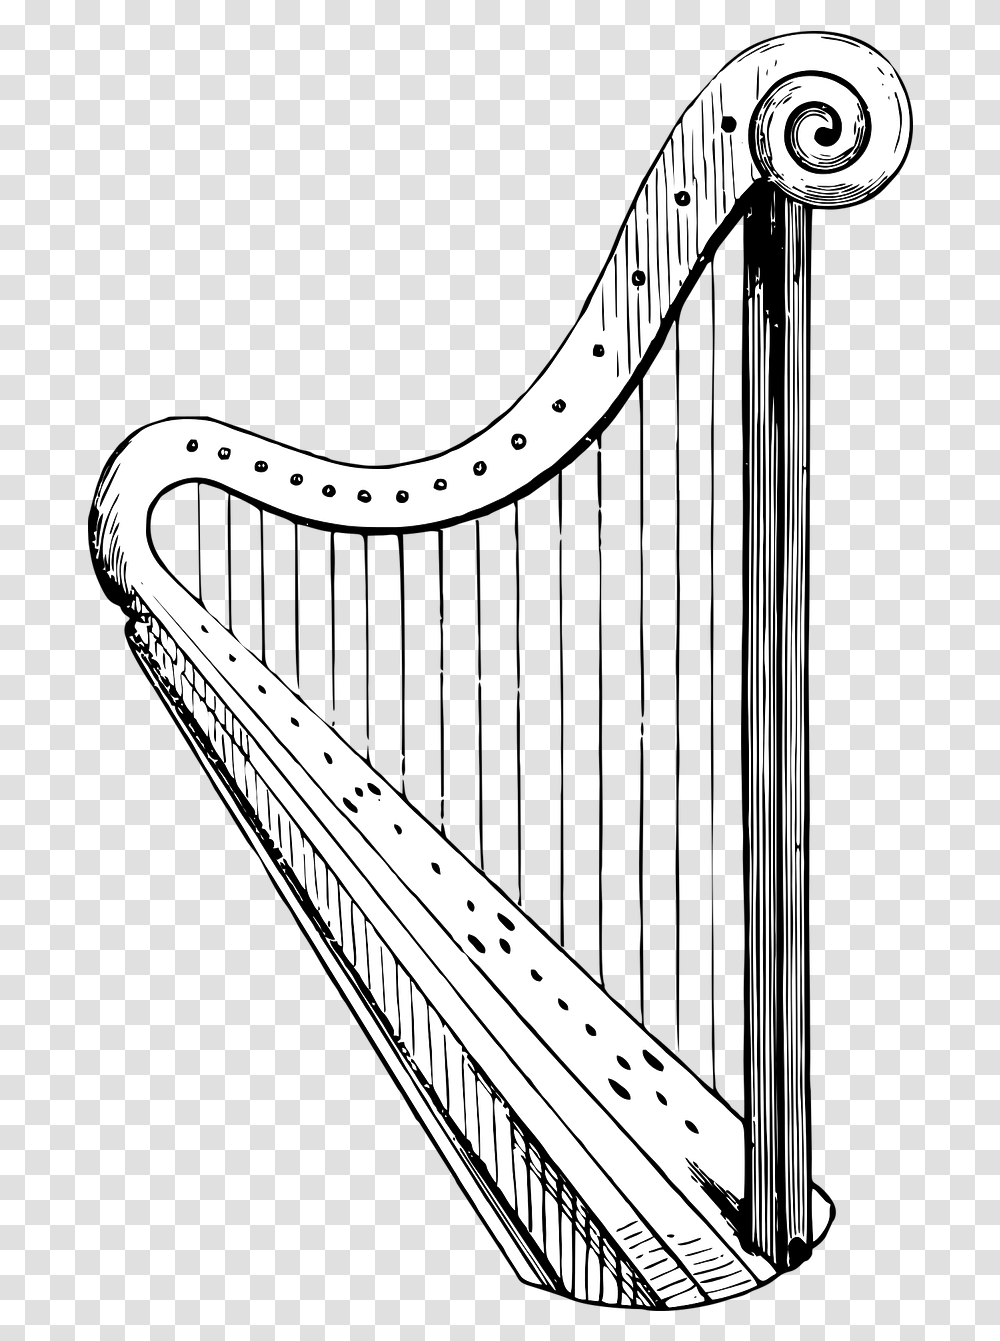 Harp Vintage Music Free Vector Graphic On Pixabay Arpa Vintage, Musical Instrument, Lyre, Leisure Activities Transparent Png